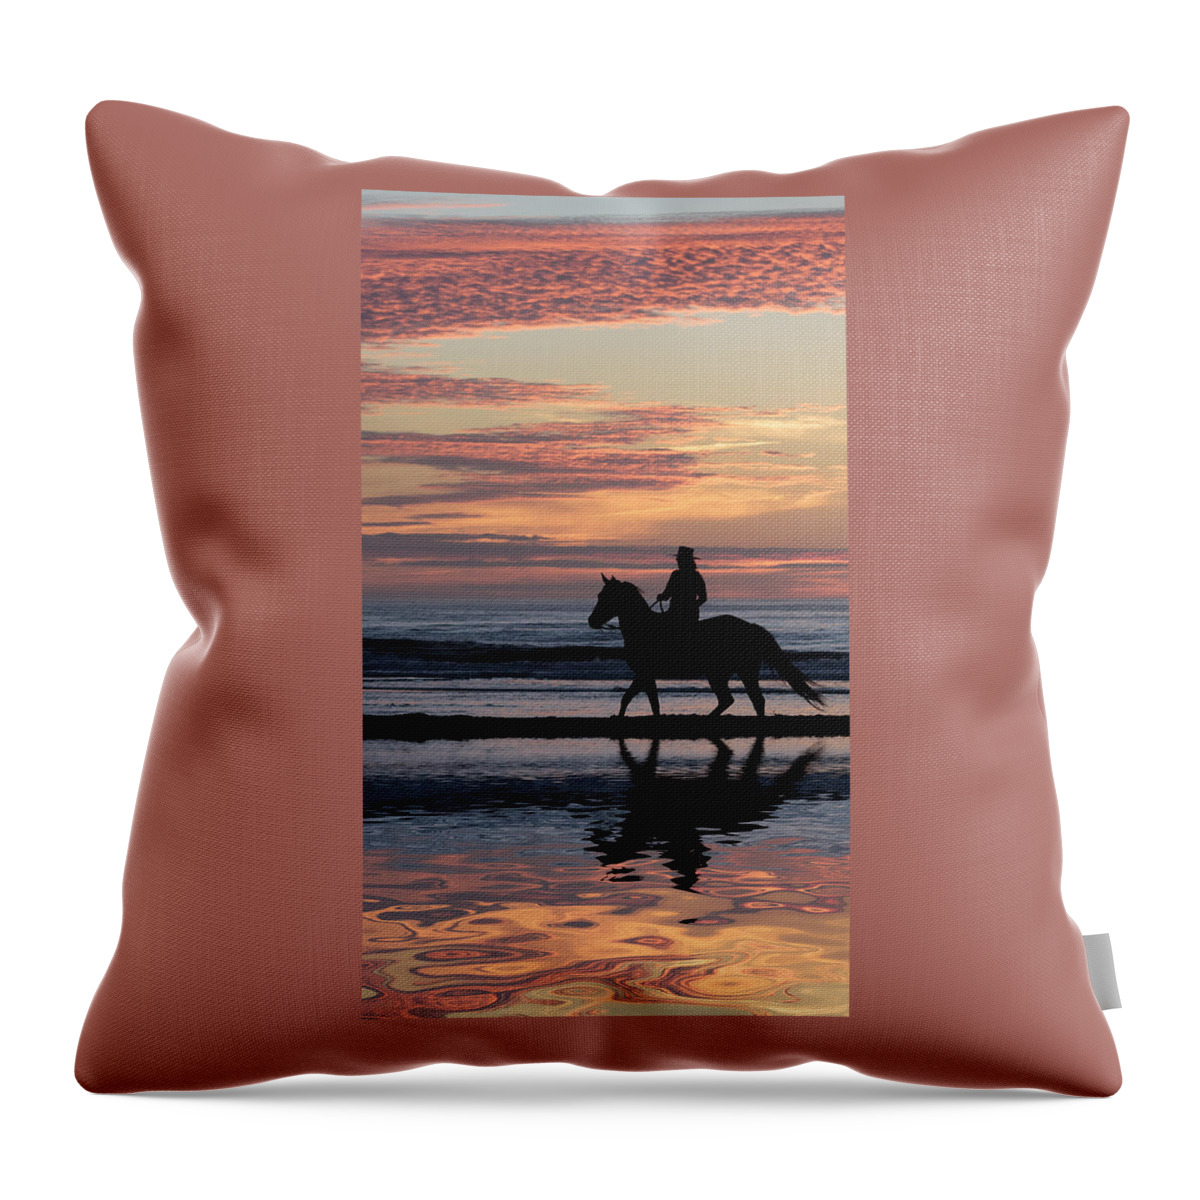 Sunset Reflections Throw Pillow featuring the photograph Sunset Reflections by Wes and Dotty Weber